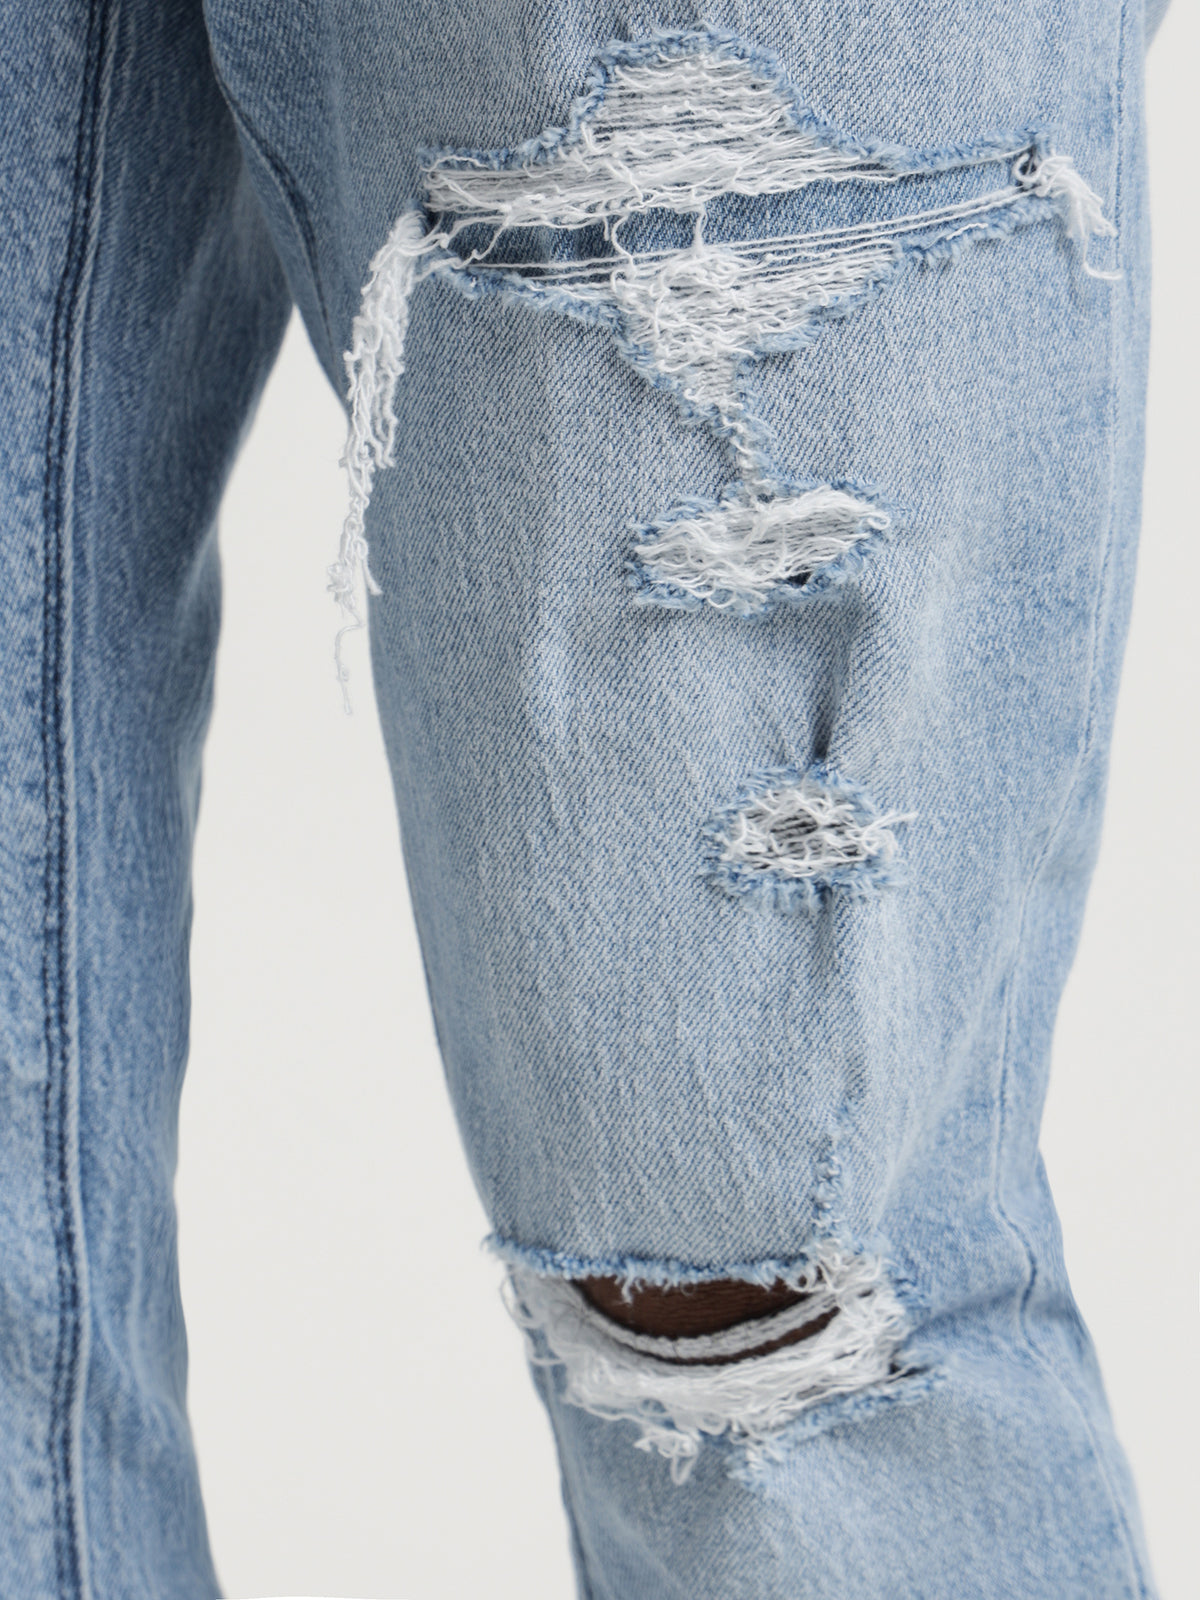 Dropped Skinny Stacked Butter Blues Shred Jeans in Denim